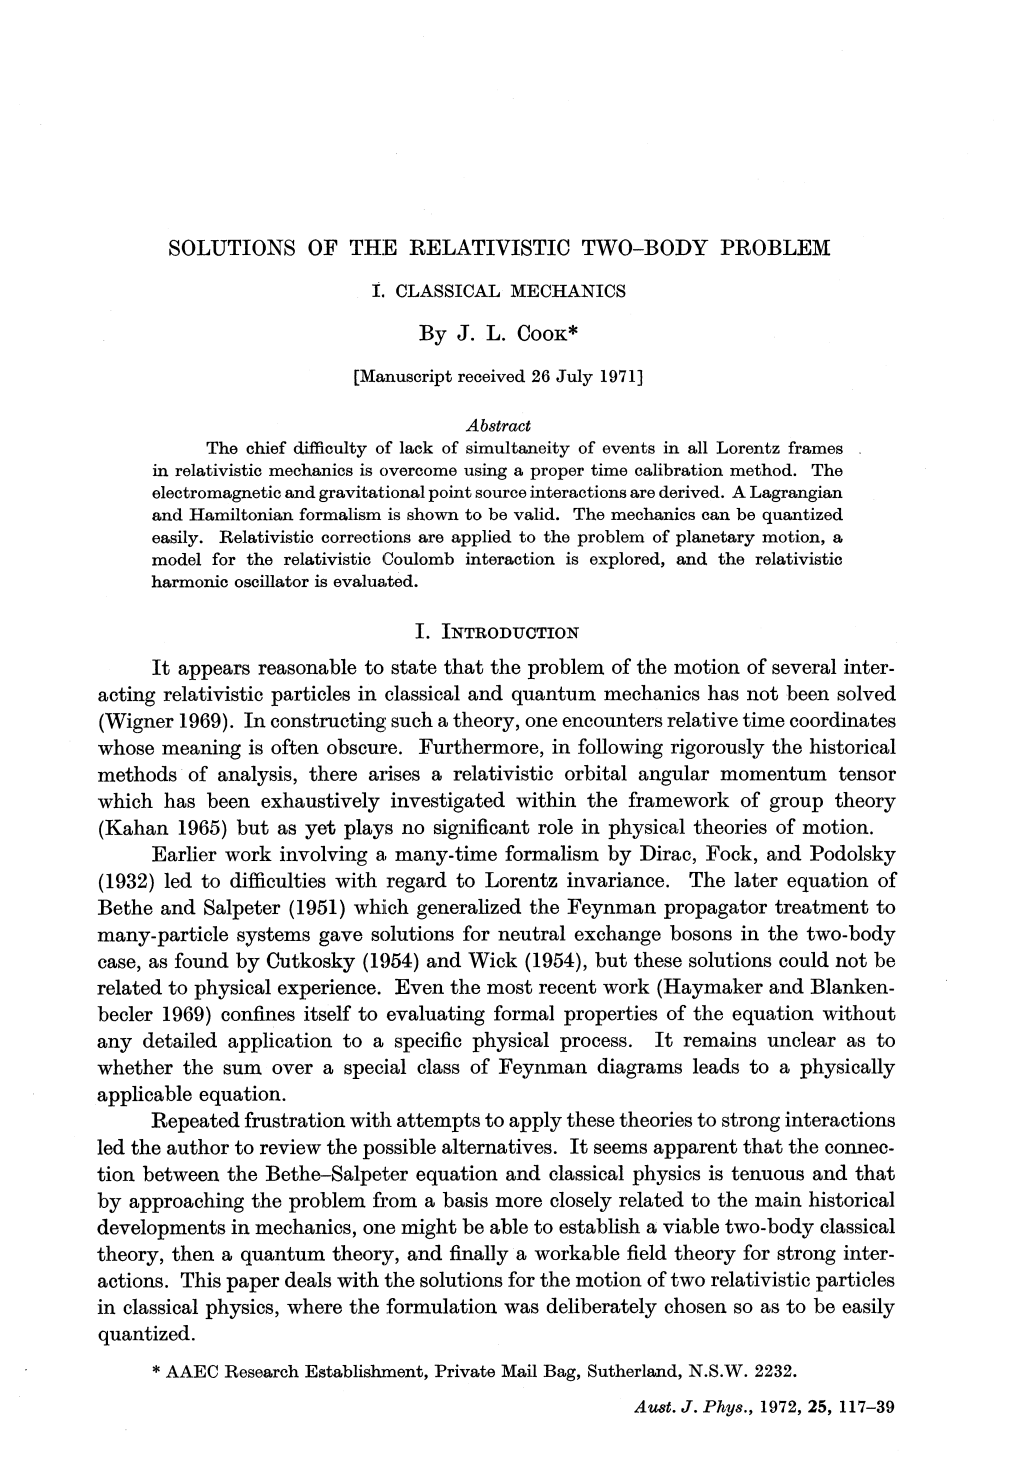 SOLUTIONS of the RELATIVISTIC TWO-BODY PROBLEM It Appears